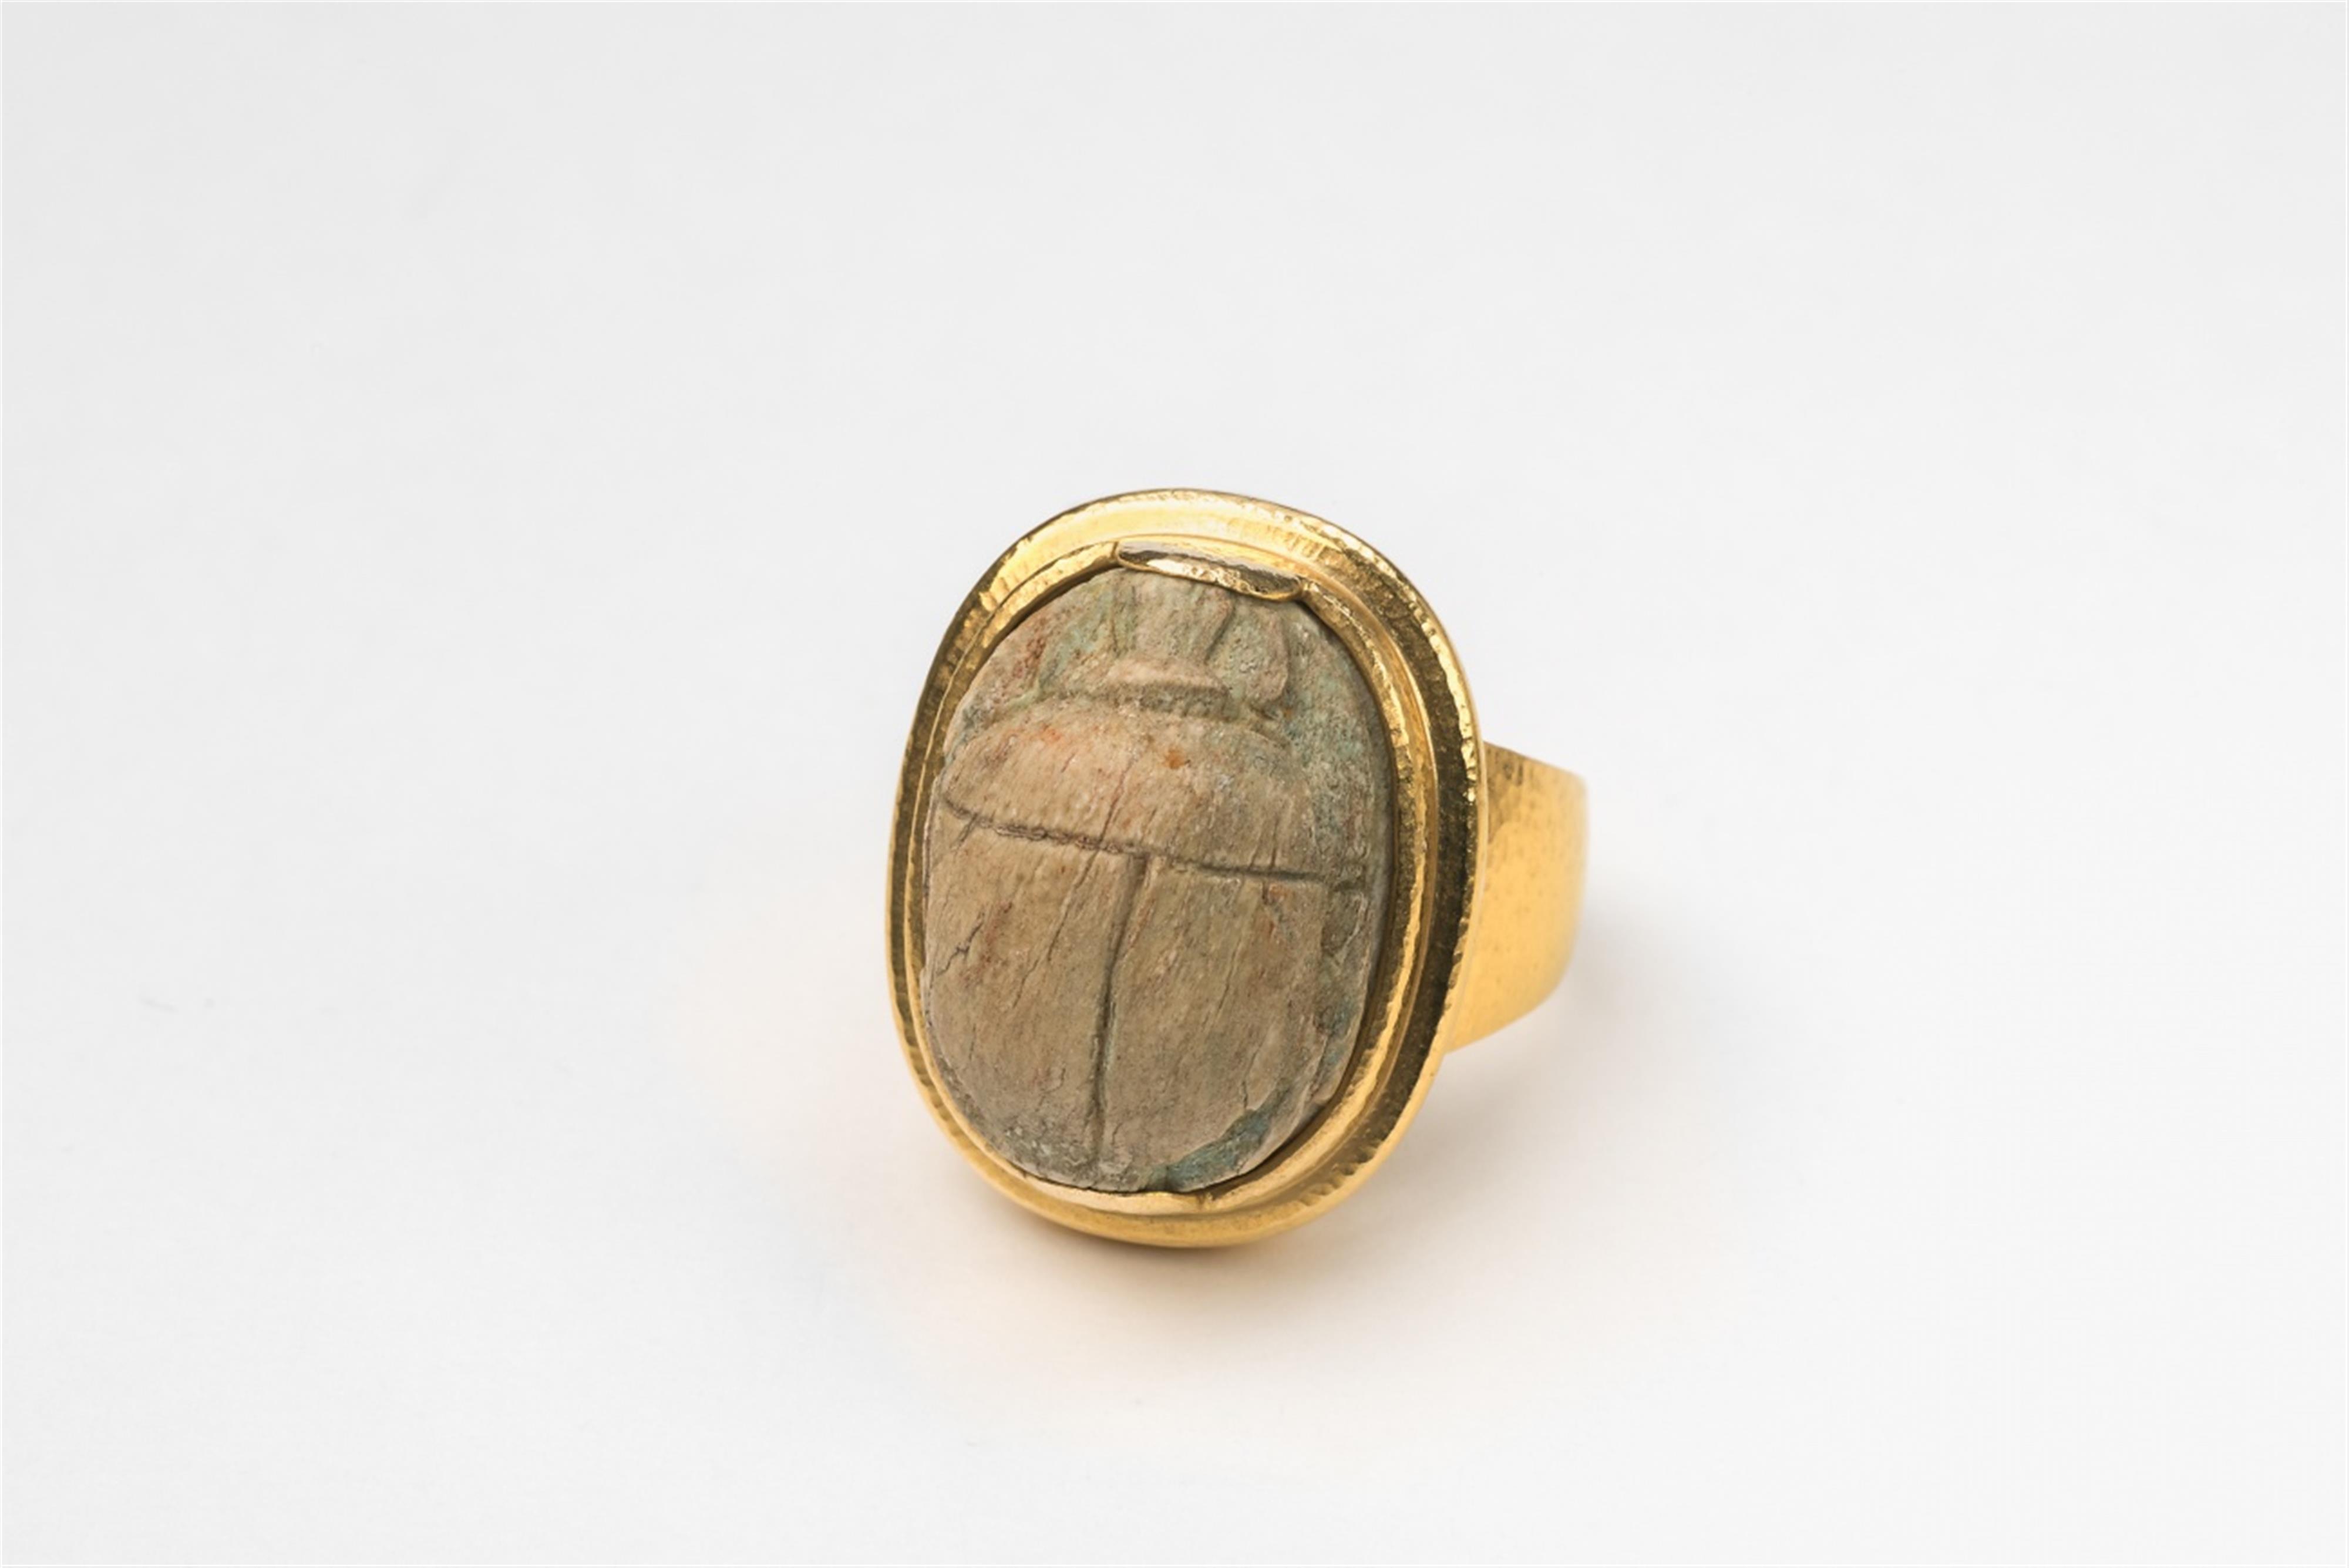 A 21k gold ring with a Ramesside scarab amulet - image-1